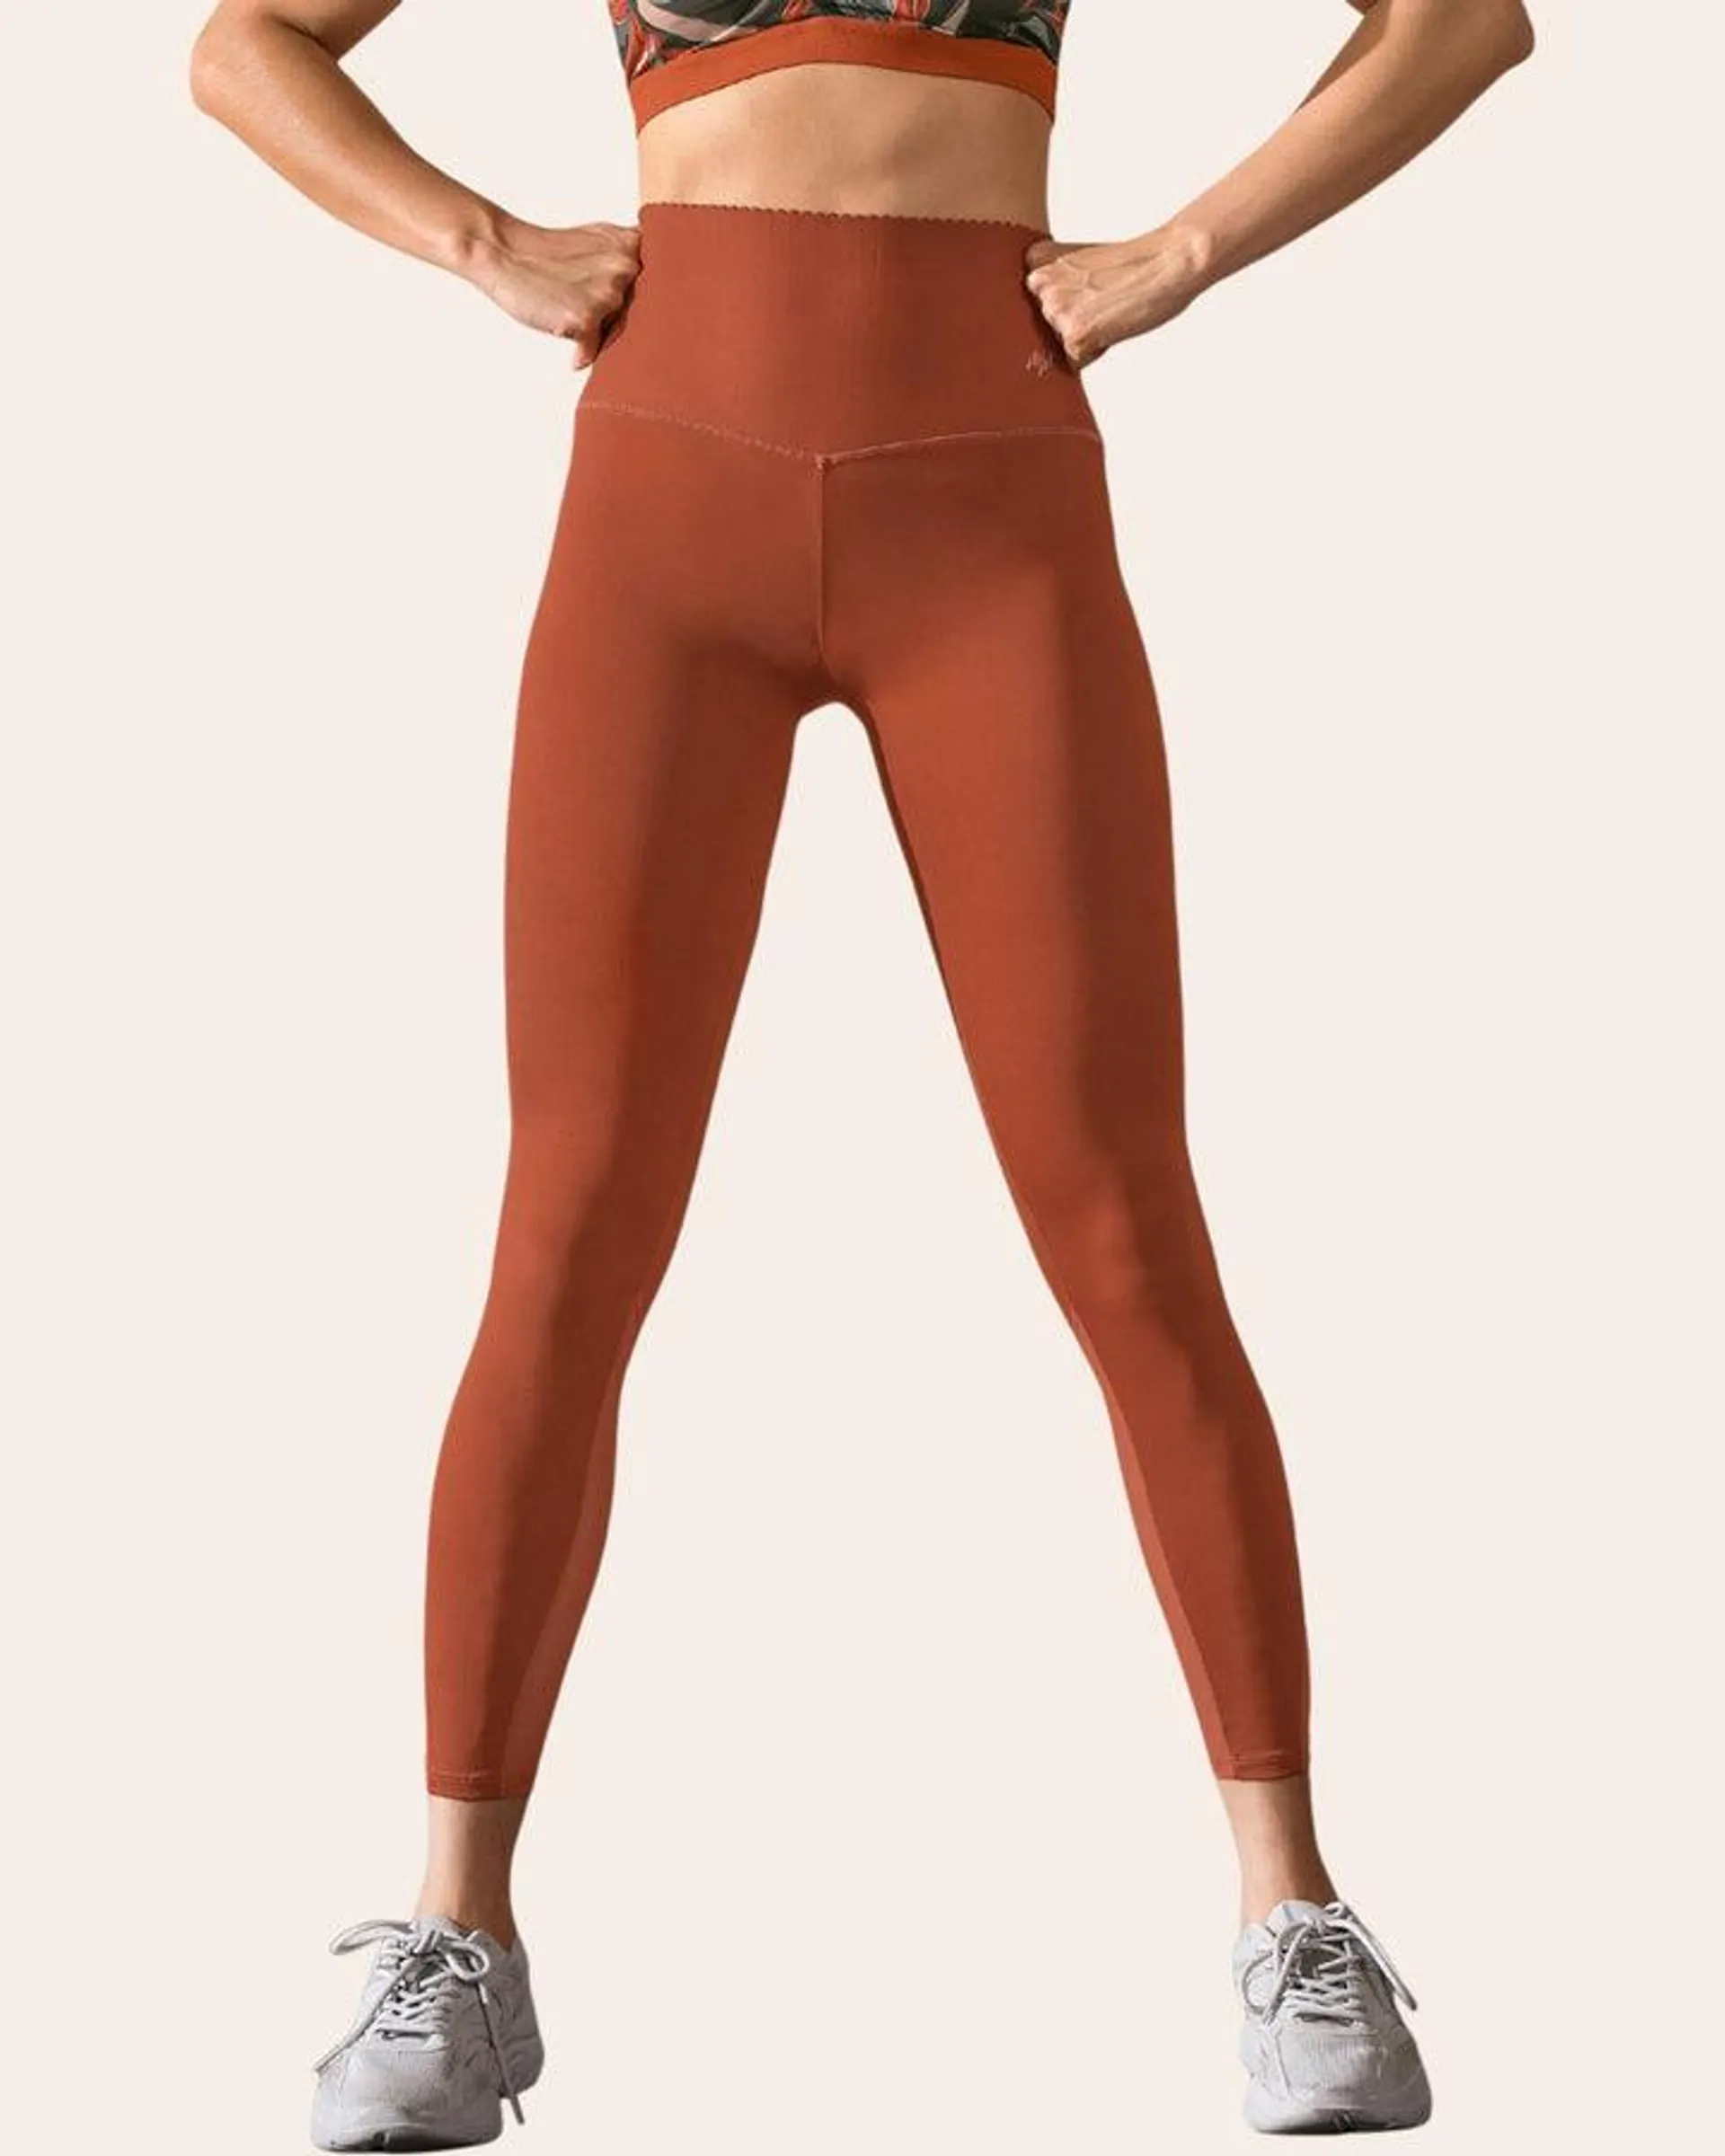 Sports Legging with Antibacterial Technology Infused with Aloe Vera